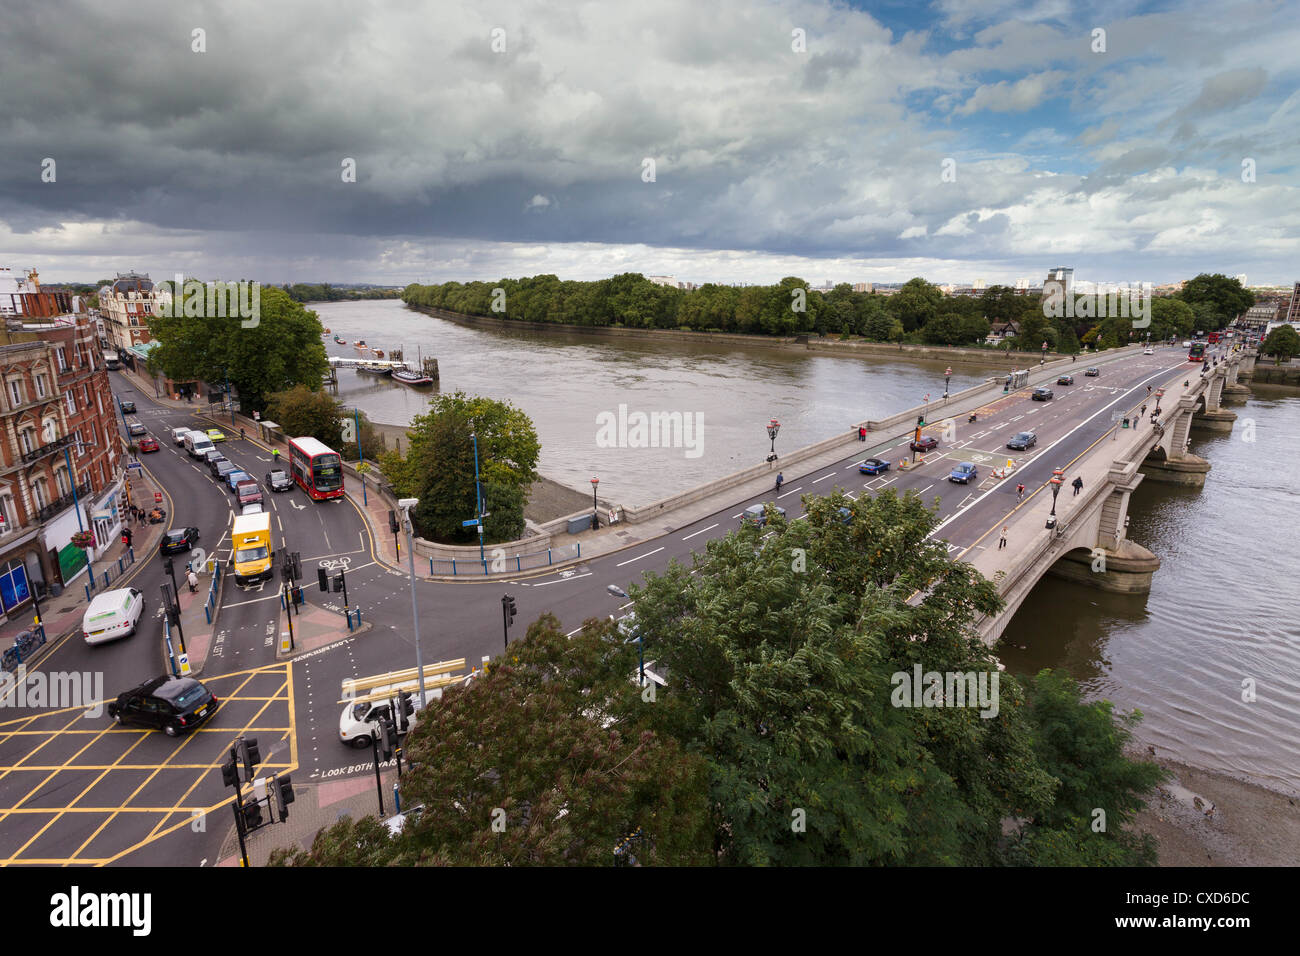 View of Putney Bridge, Putney Embankment and the river Thames, London, from the tower of St. Mary's church, Putney Stock Photo